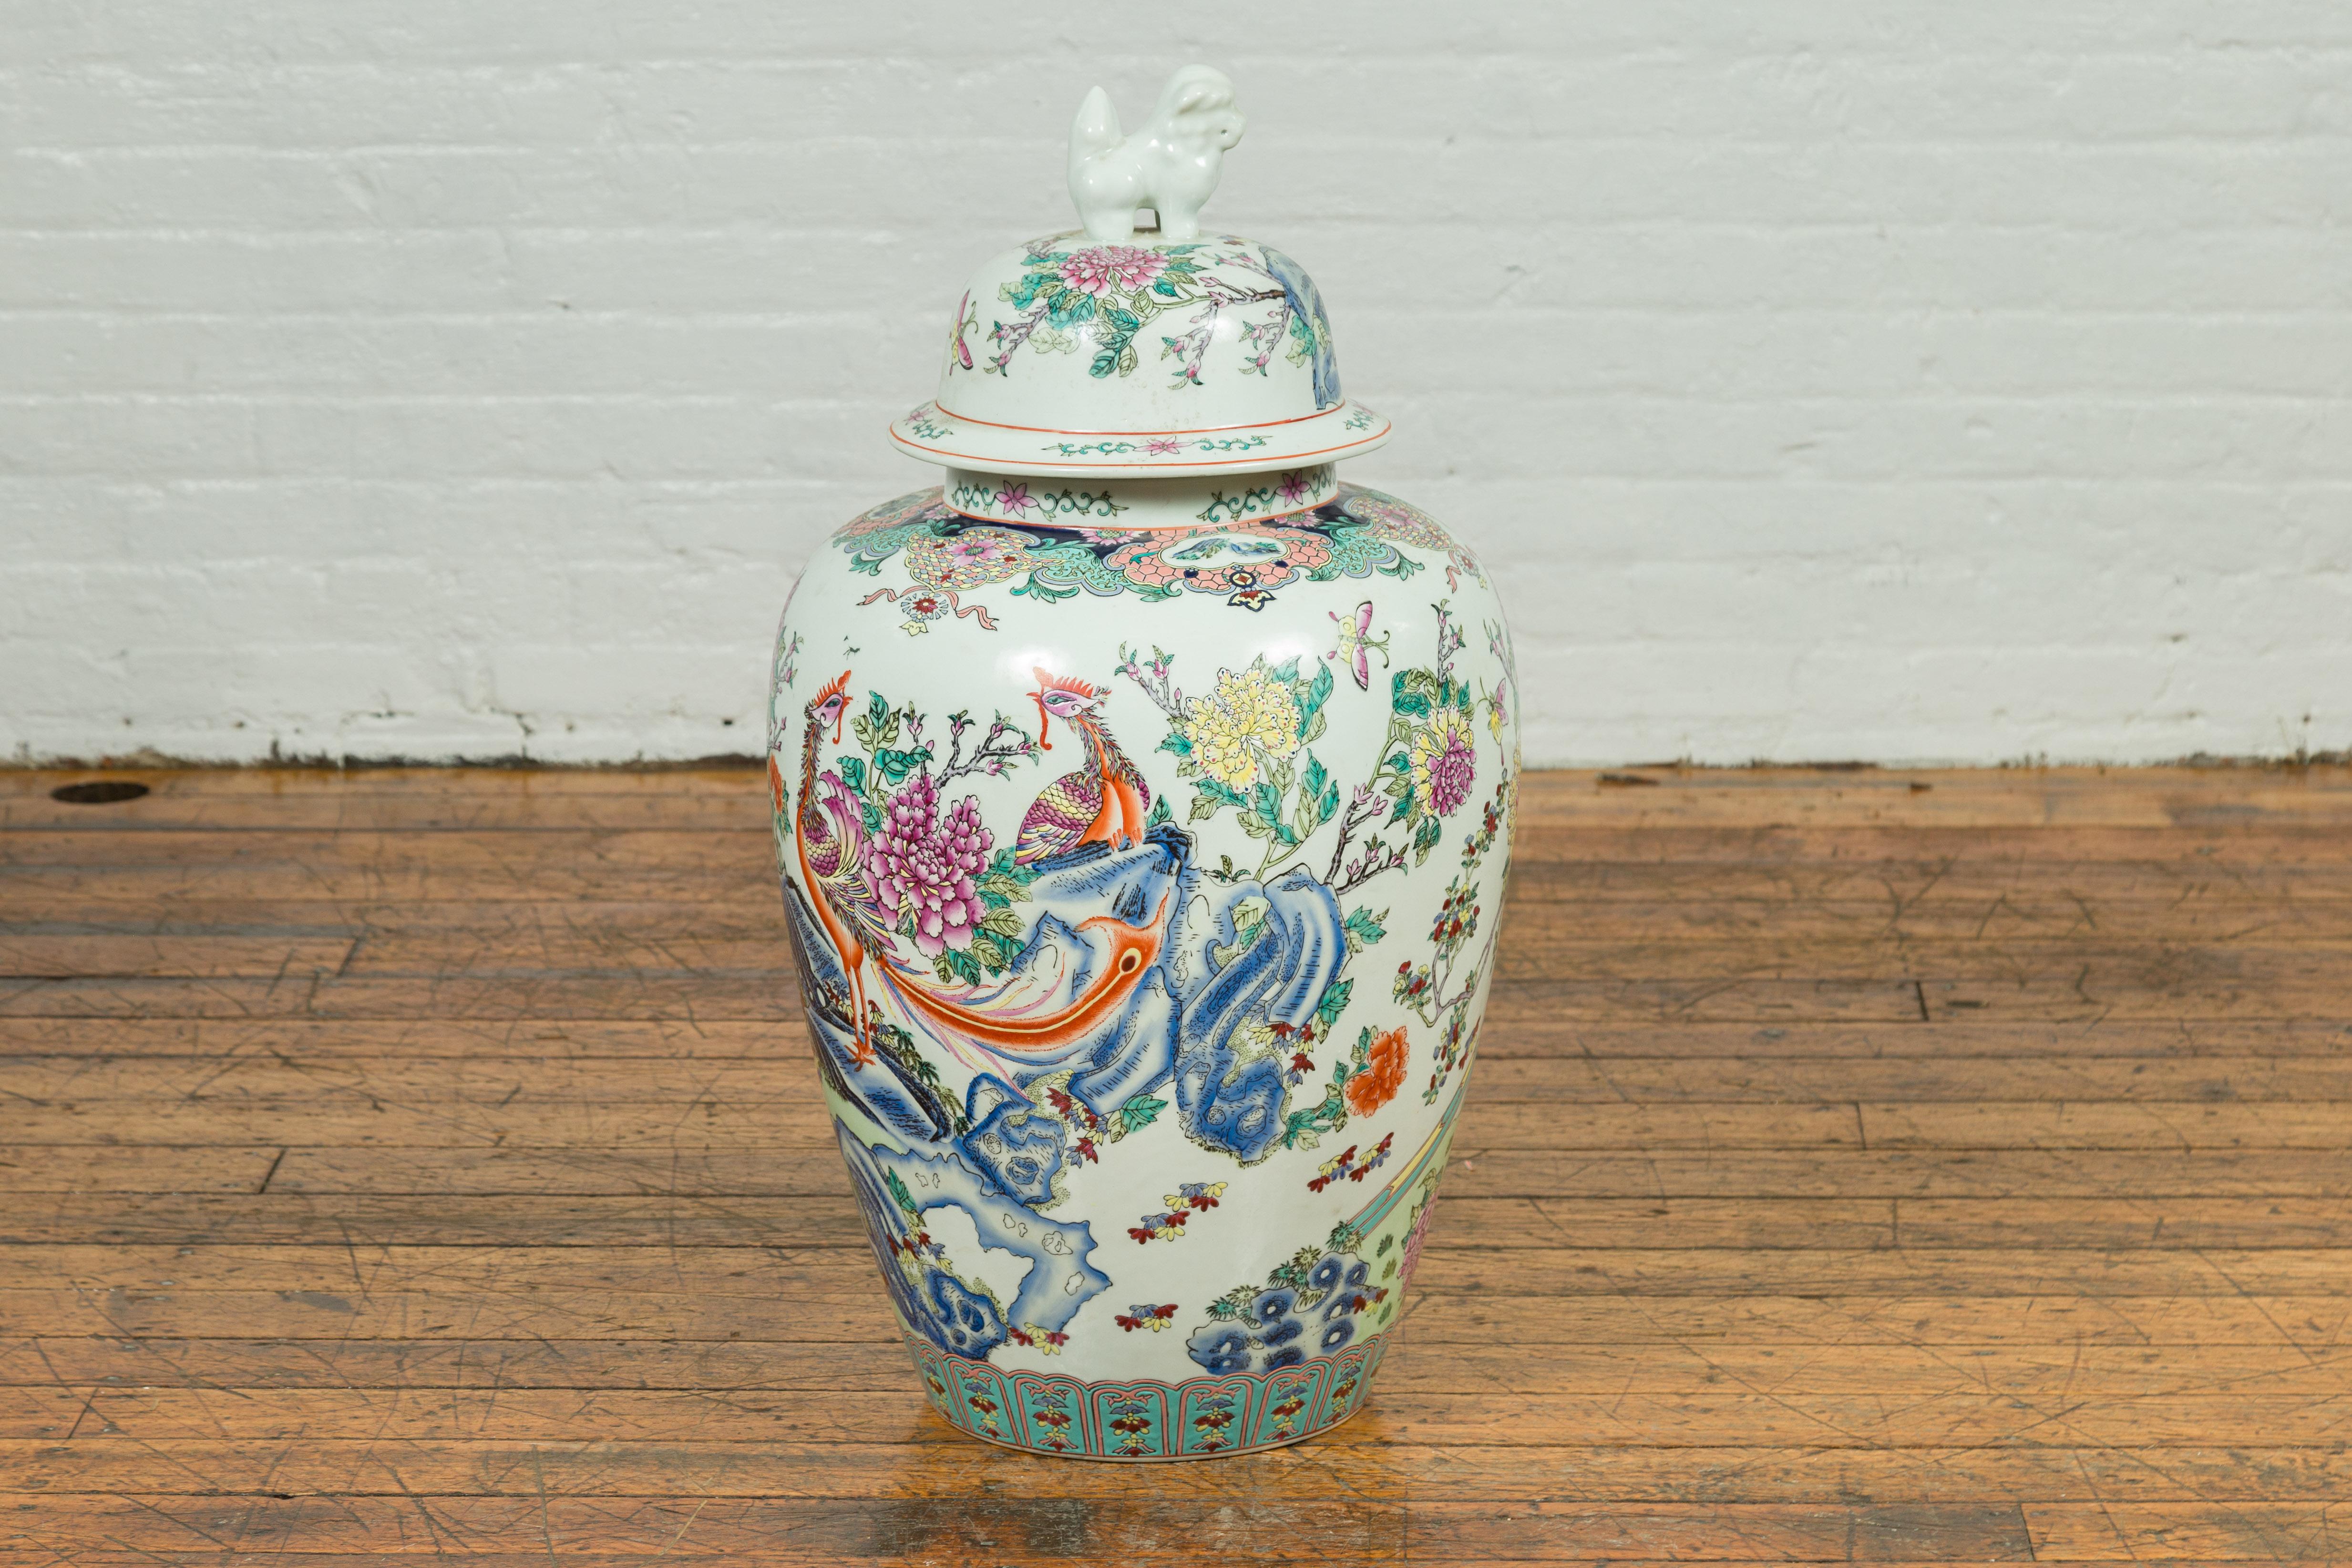 A vintage Chinese palace jar from the mid-20th century, handmade and painted on porcelain and topped with an animal figure. This tall jar features a phoenix among rocks and flowers. This flower and bird theme is common in Chinese painting, but the